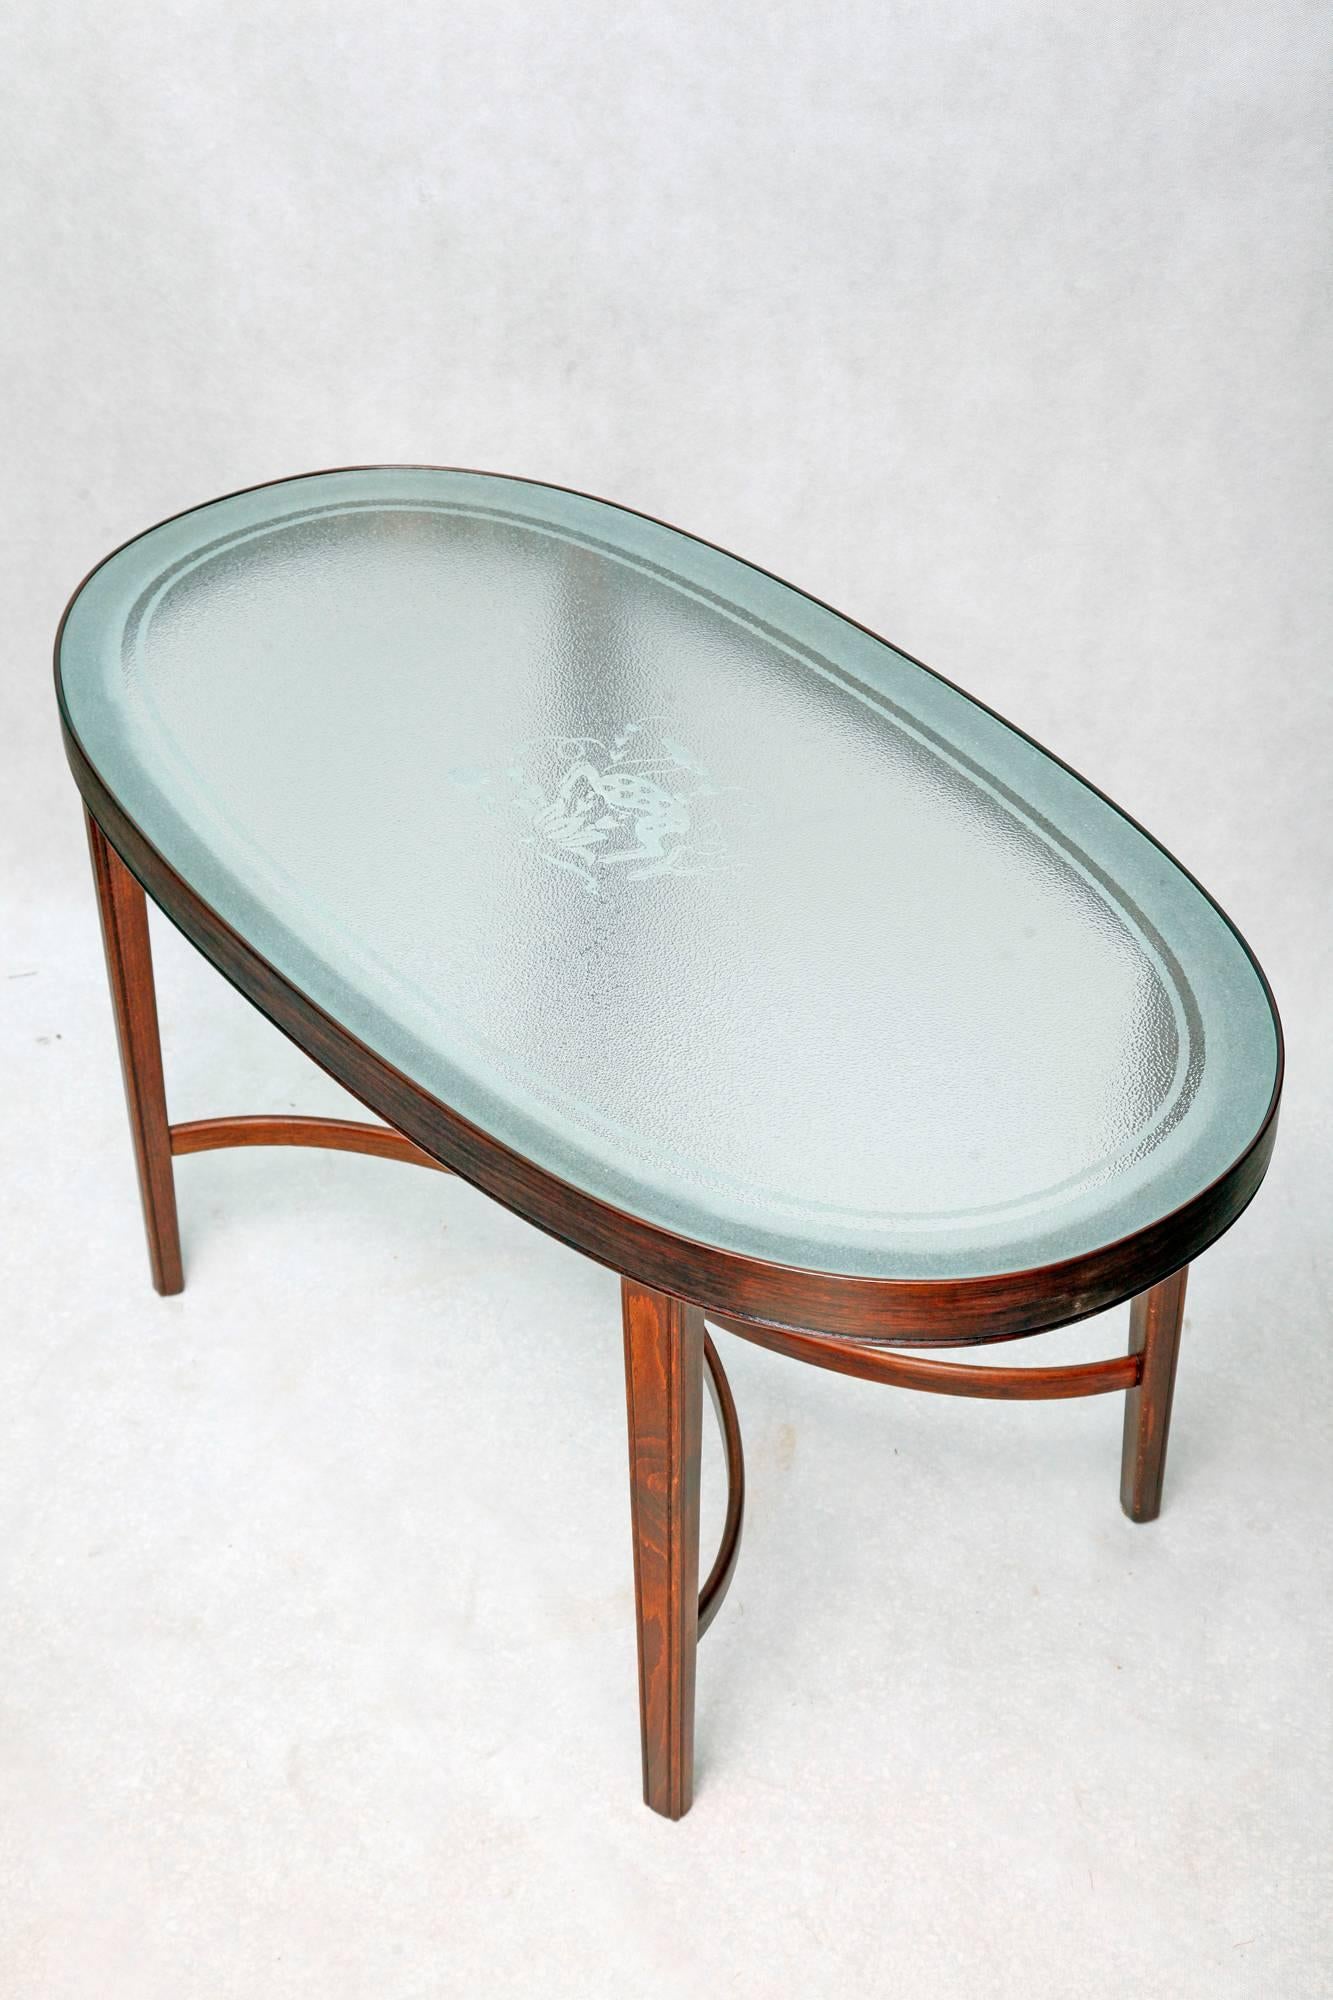 Beech Coffee Table with a Glass Top, Denmark, 1940s For Sale 1